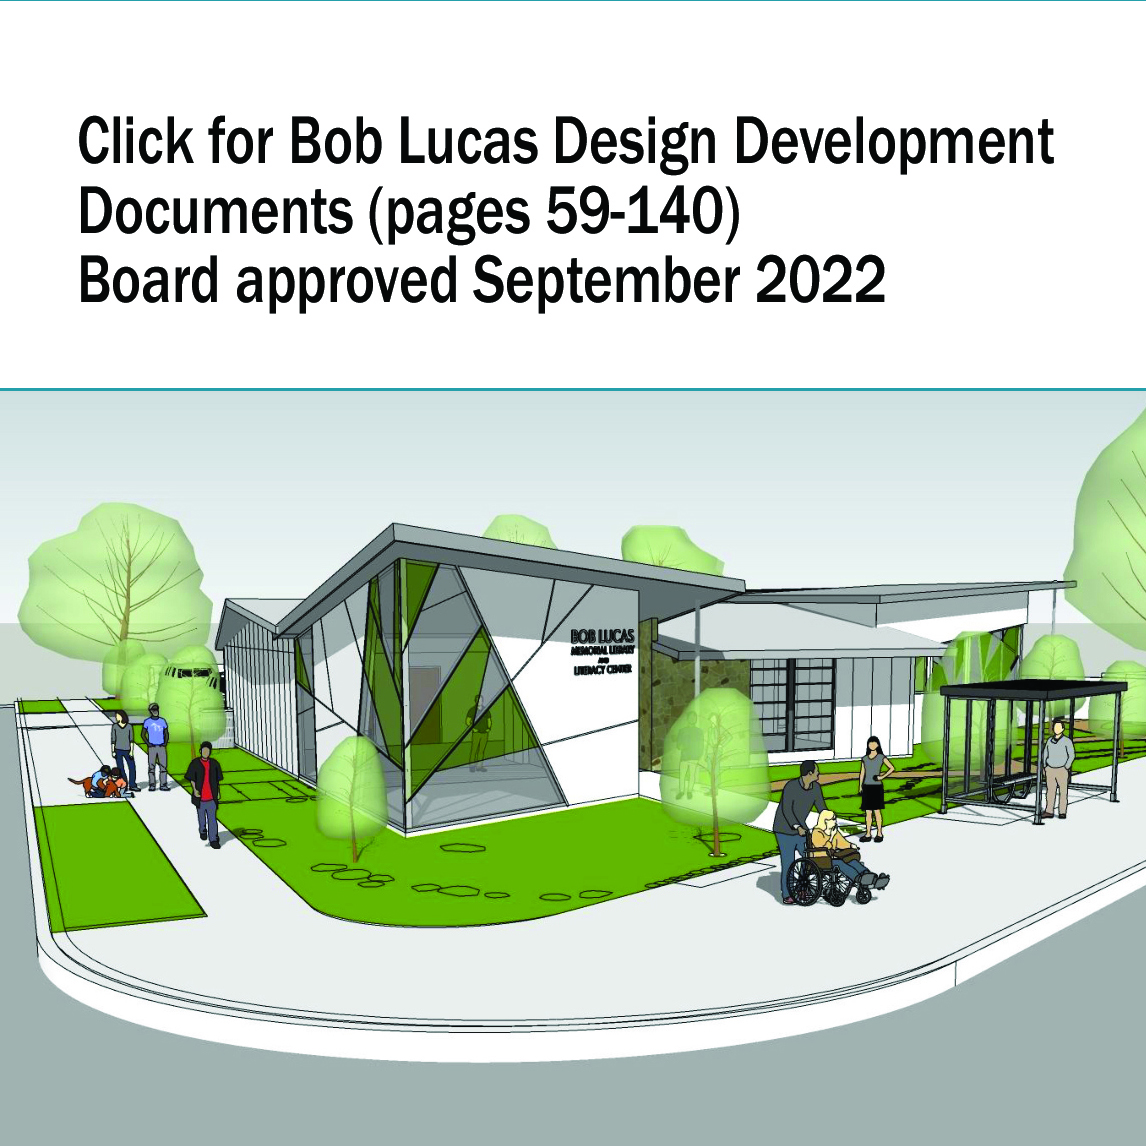 Click for Bob Lucas Design Development Documents (pages 59-140) Board approved Sept. 2022